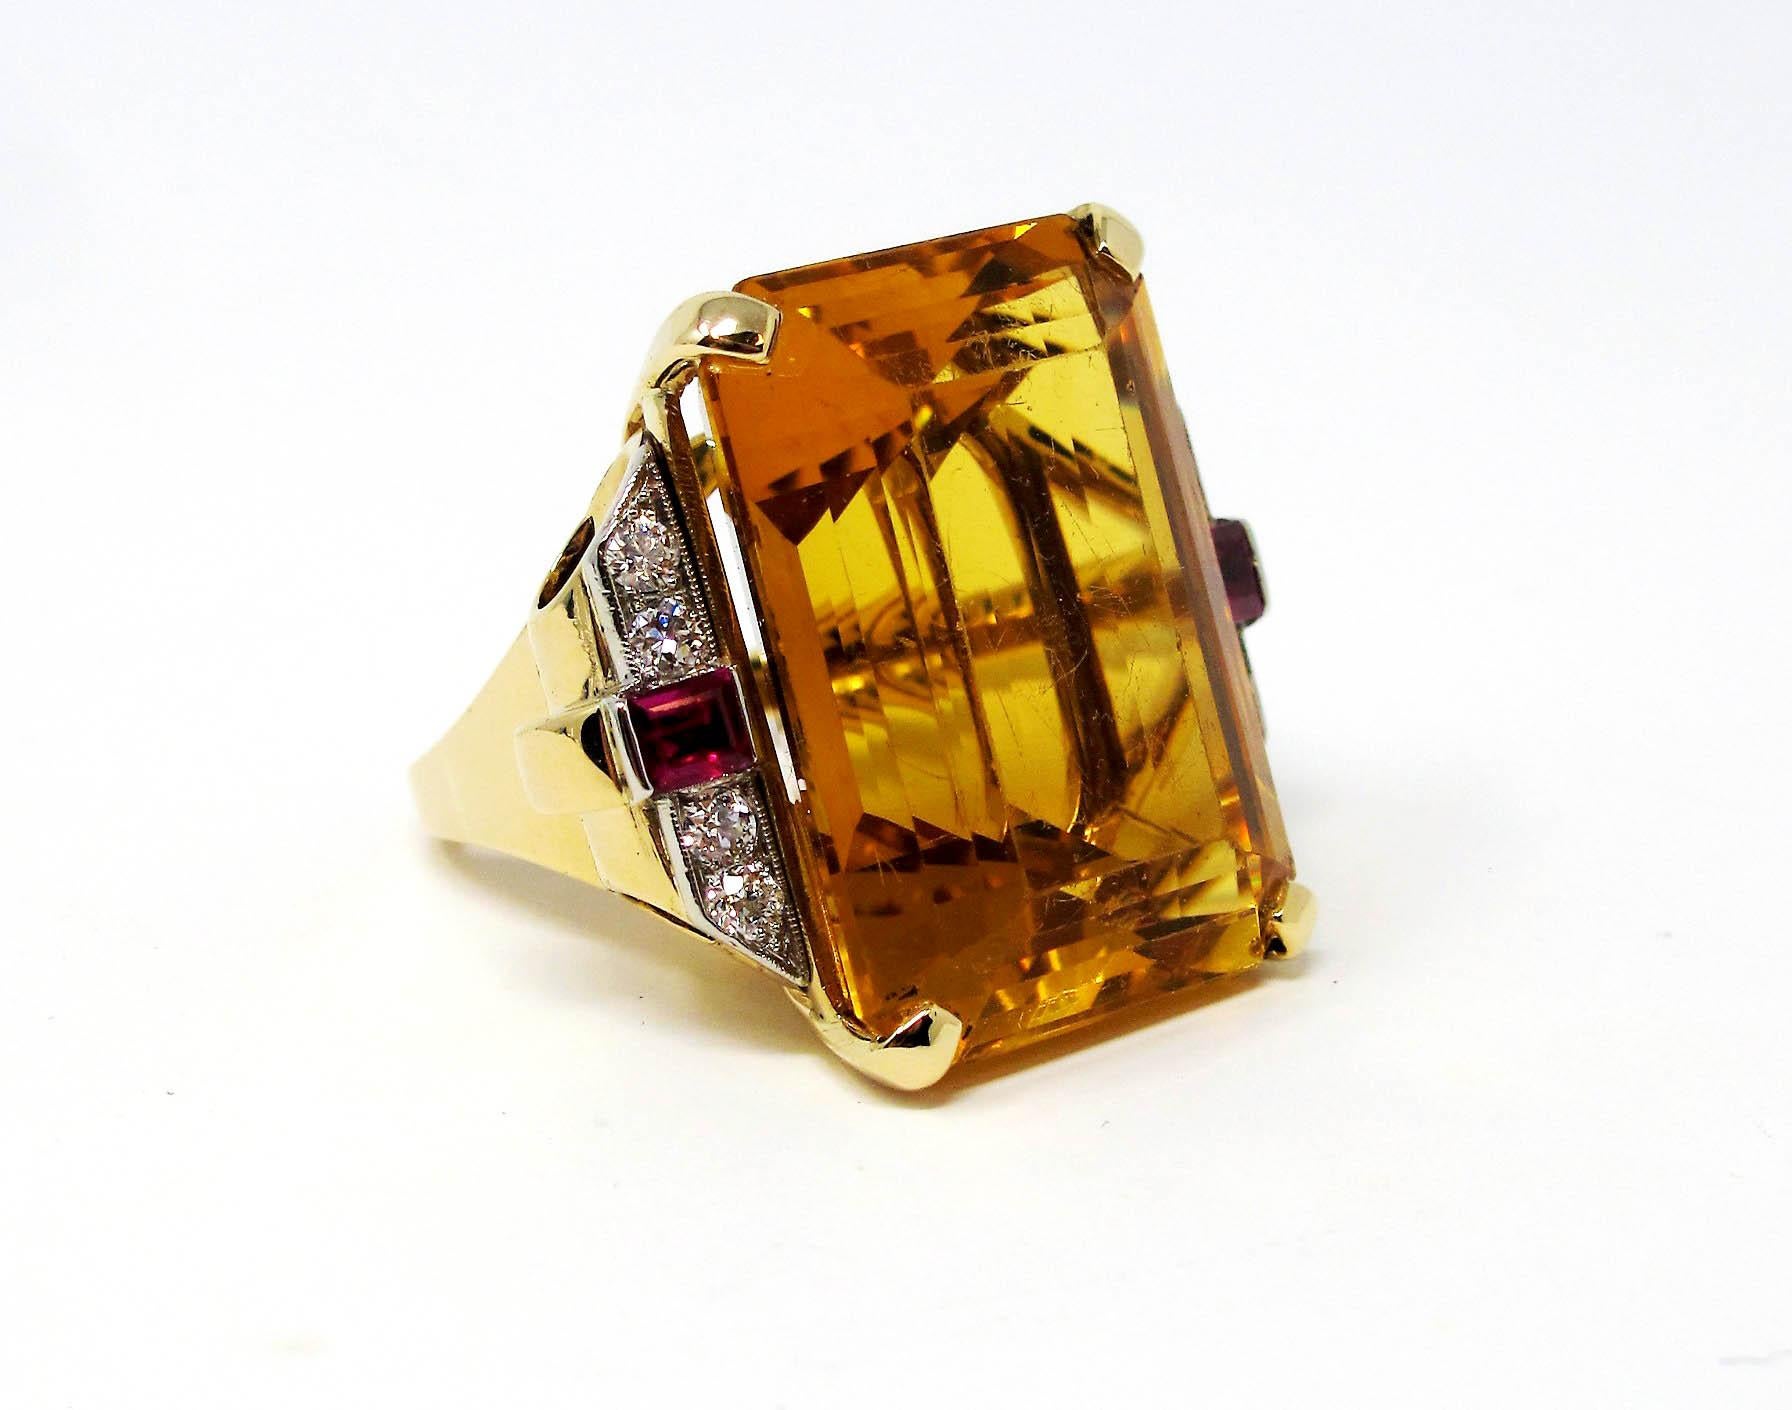 Let your fingers play dress-up with this sensational, oversized cocktail ring. Featuring an eye-catching emerald cut citrine stone, as well as shimmering diamond and ruby accents, this stunner of a ring makes a bold statement with both its